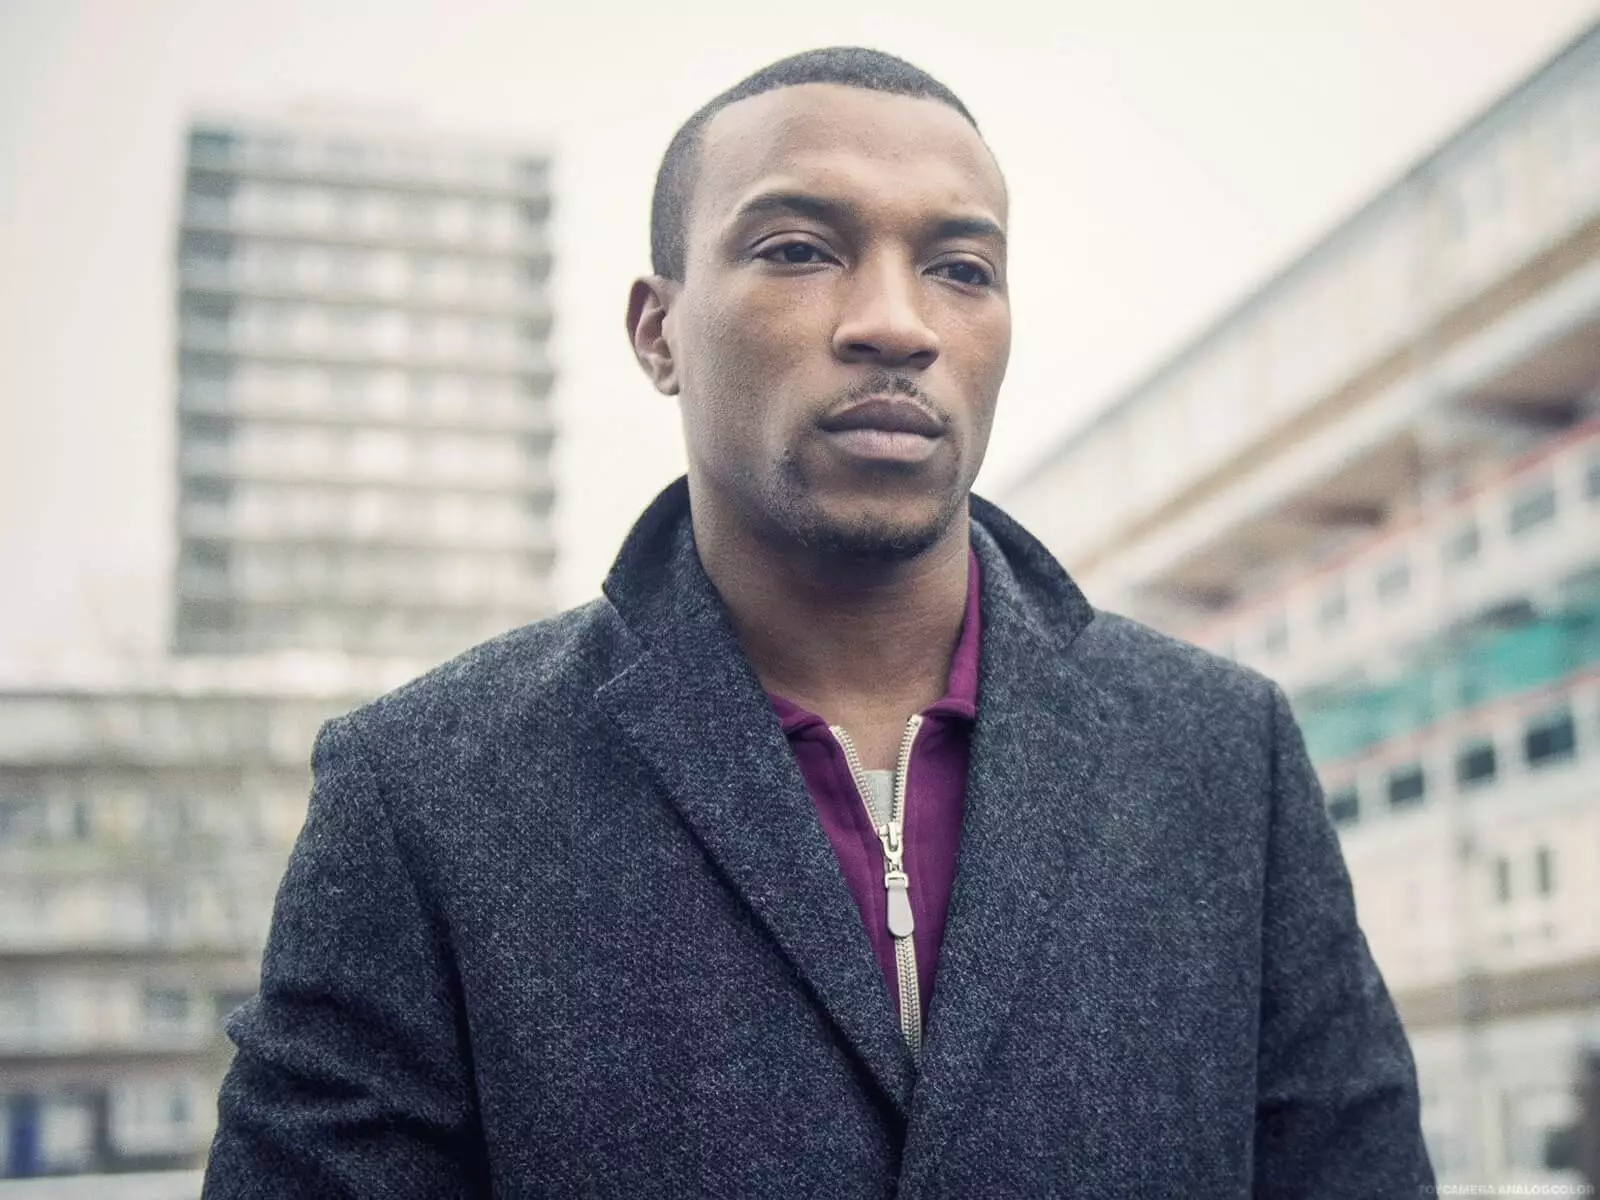 Ashley Walters has spoken out about allegations made about his co-star (